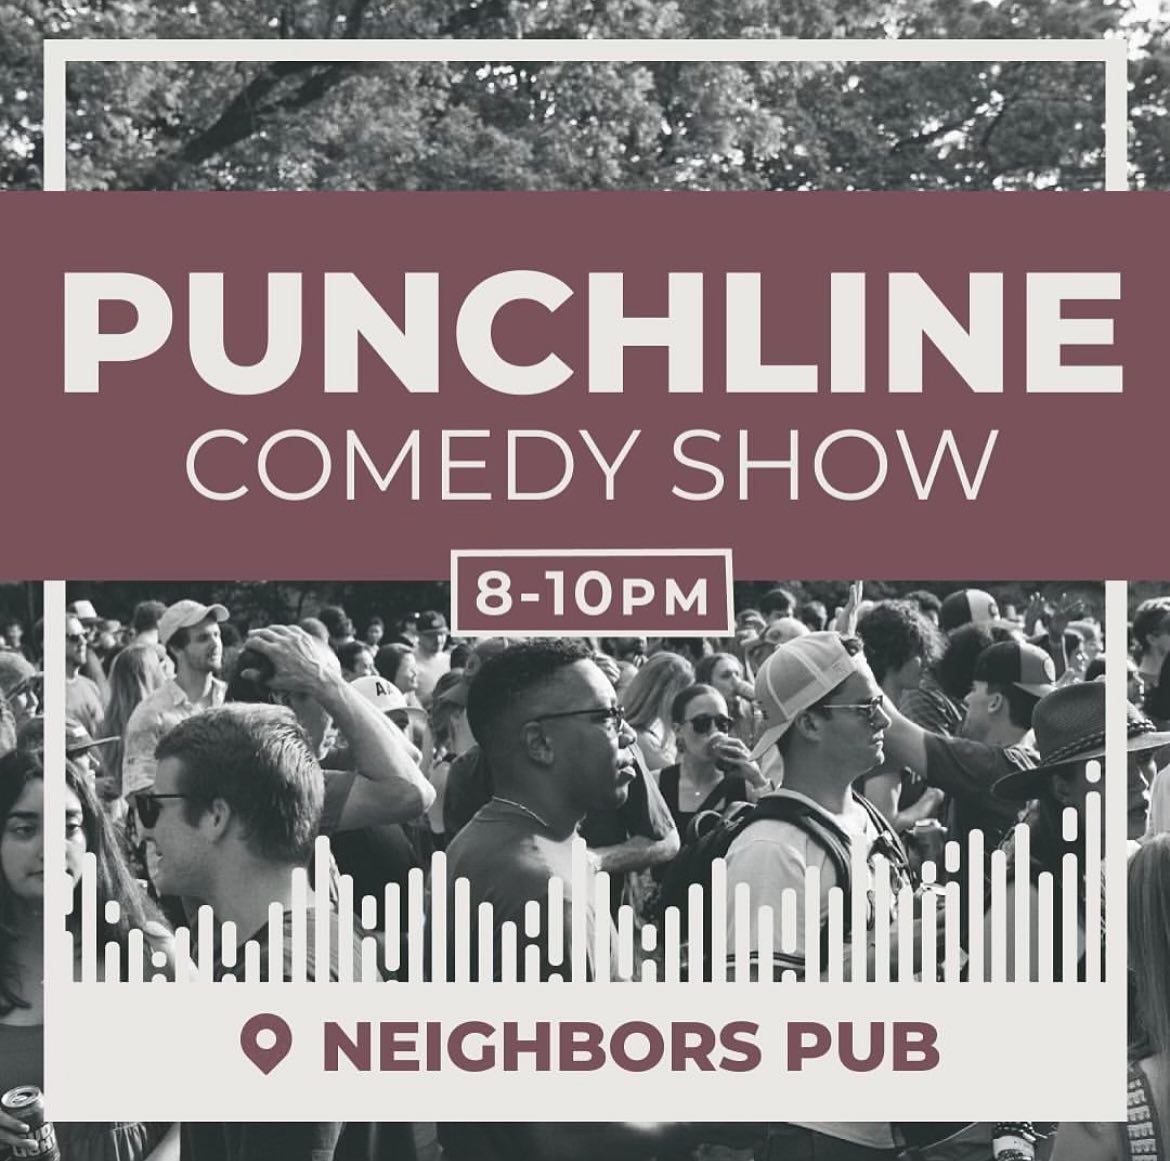 Did you miss us? We&rsquo;re making our triumphant return at Virginia Highland Porchfest! After a day of jamming to all your favorite bands come have a laugh with us at Neighbors Pub. Tickets in our bio!